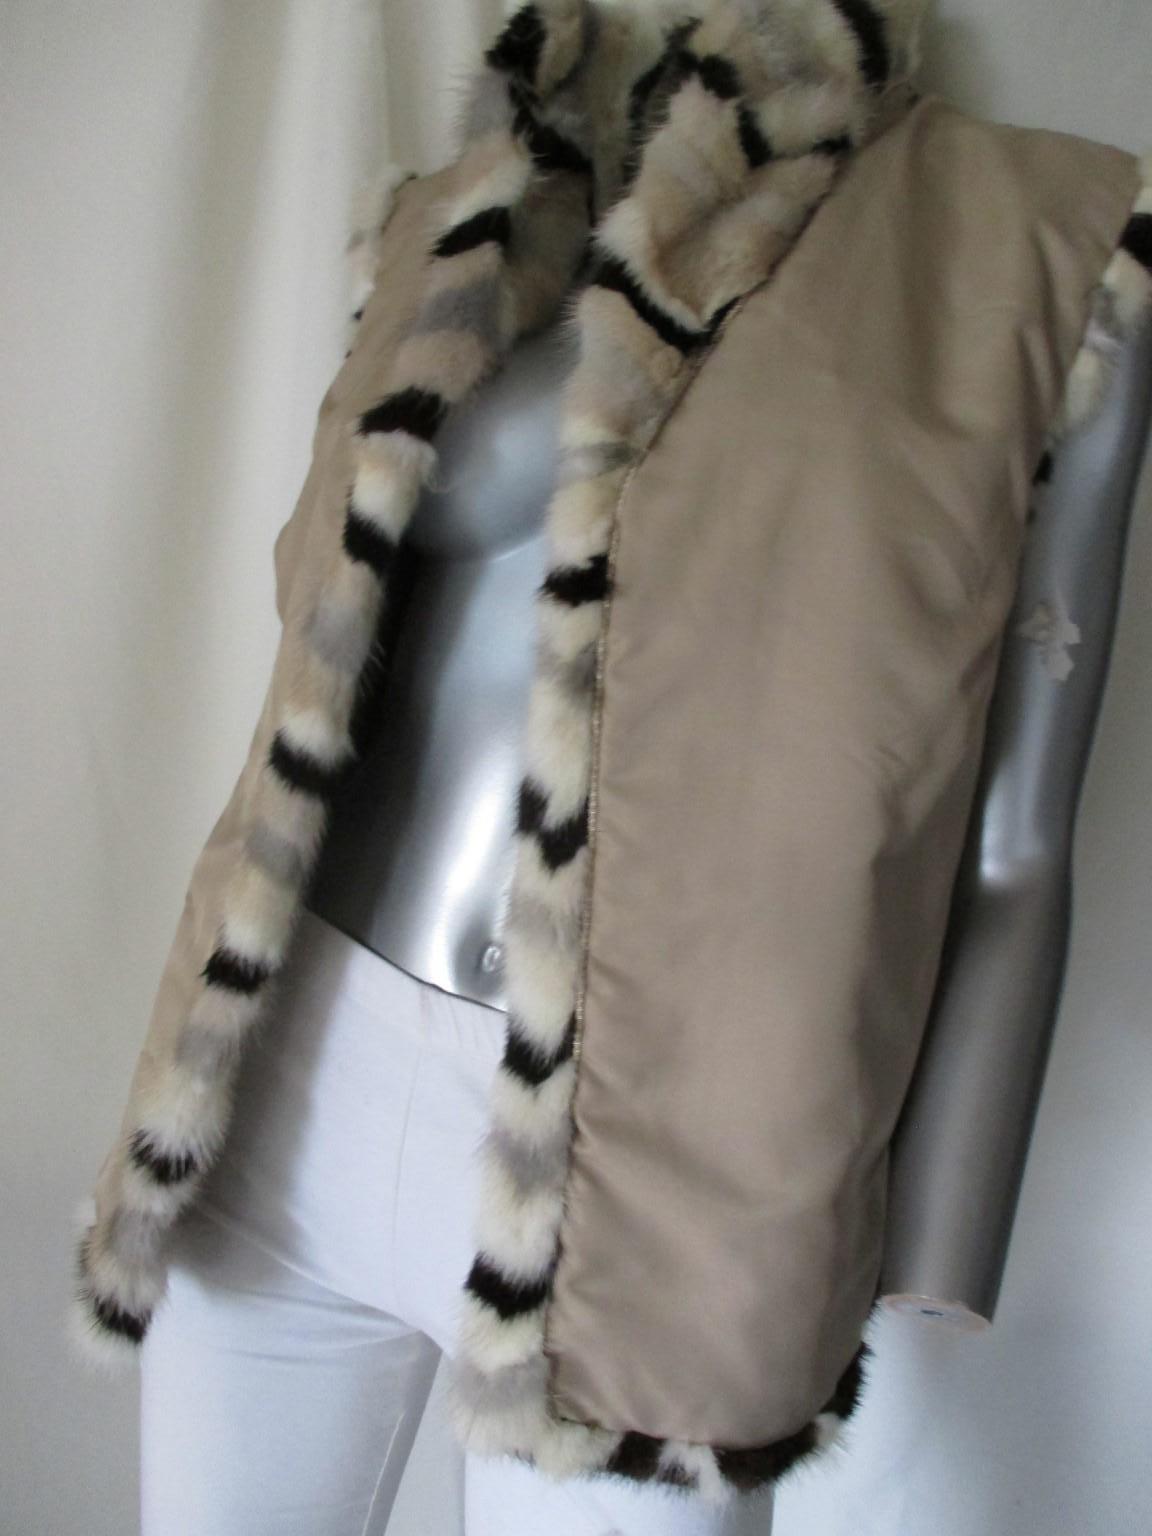 This vintage mink vest has 2 pockets, no closure buttons, can be worn inside out.
Its in good pre-loved condition 
Color: grey, black, brown, creme
Size appears to be medium, please refer to the measurements in the description.

Please note that